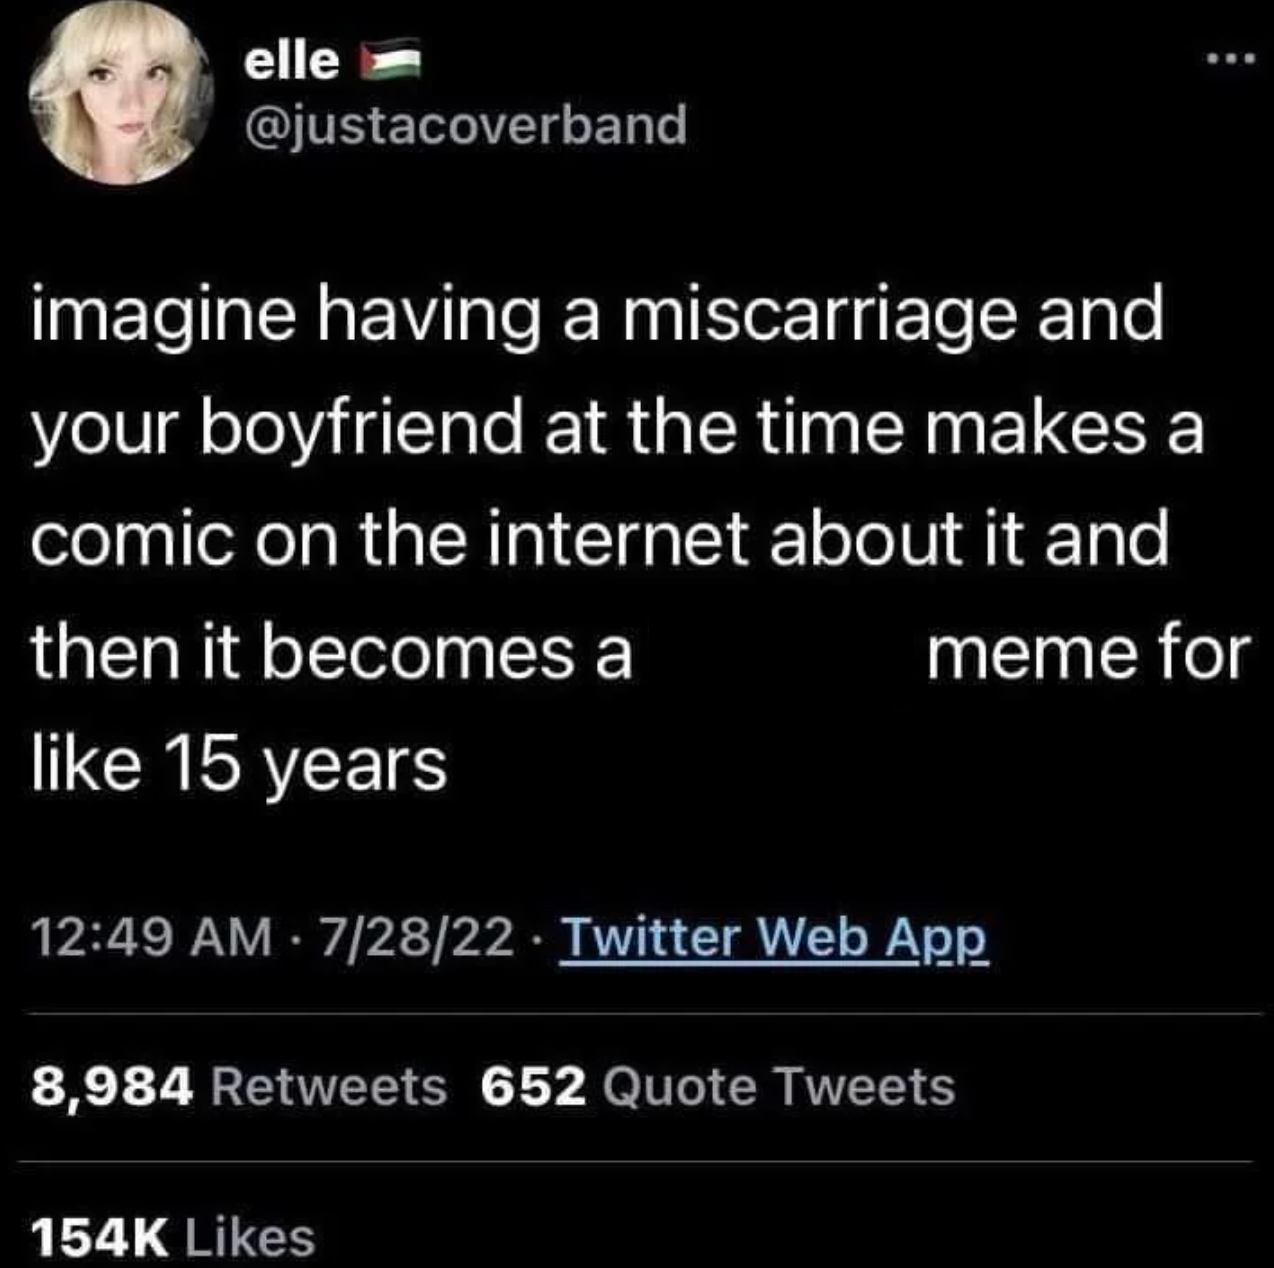 screenshot - elle imagine having a miscarriage and your boyfriend at the time makes a comic on the internet about it and then it becomes a 15 years meme for 72822 Twitter Web App 8,984 652 Quote Tweets